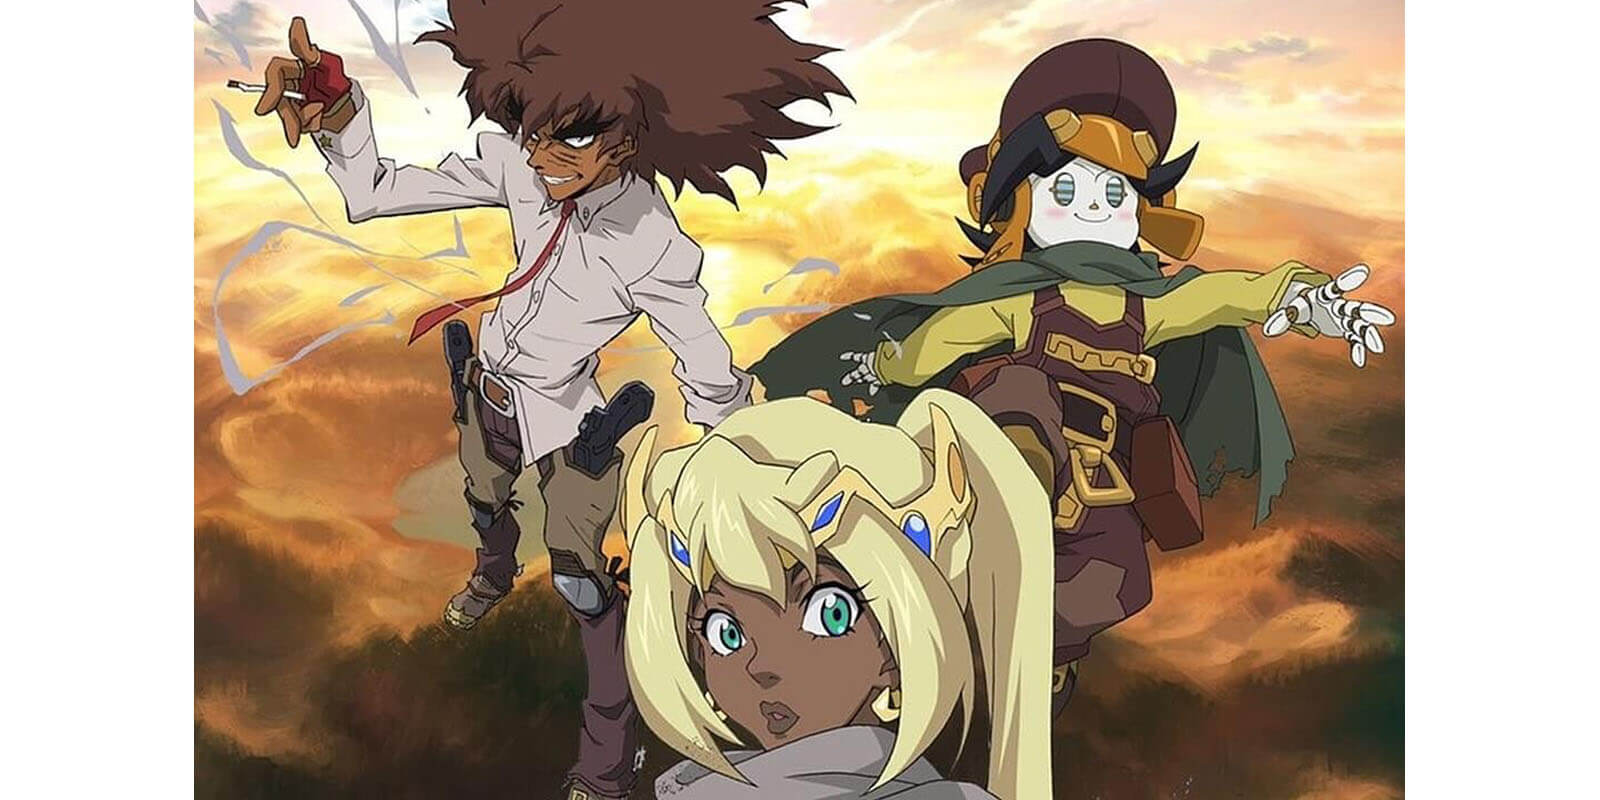 "Cannon Busters" is a project both LeSean Thomas and Thomas Romain are currently working on.